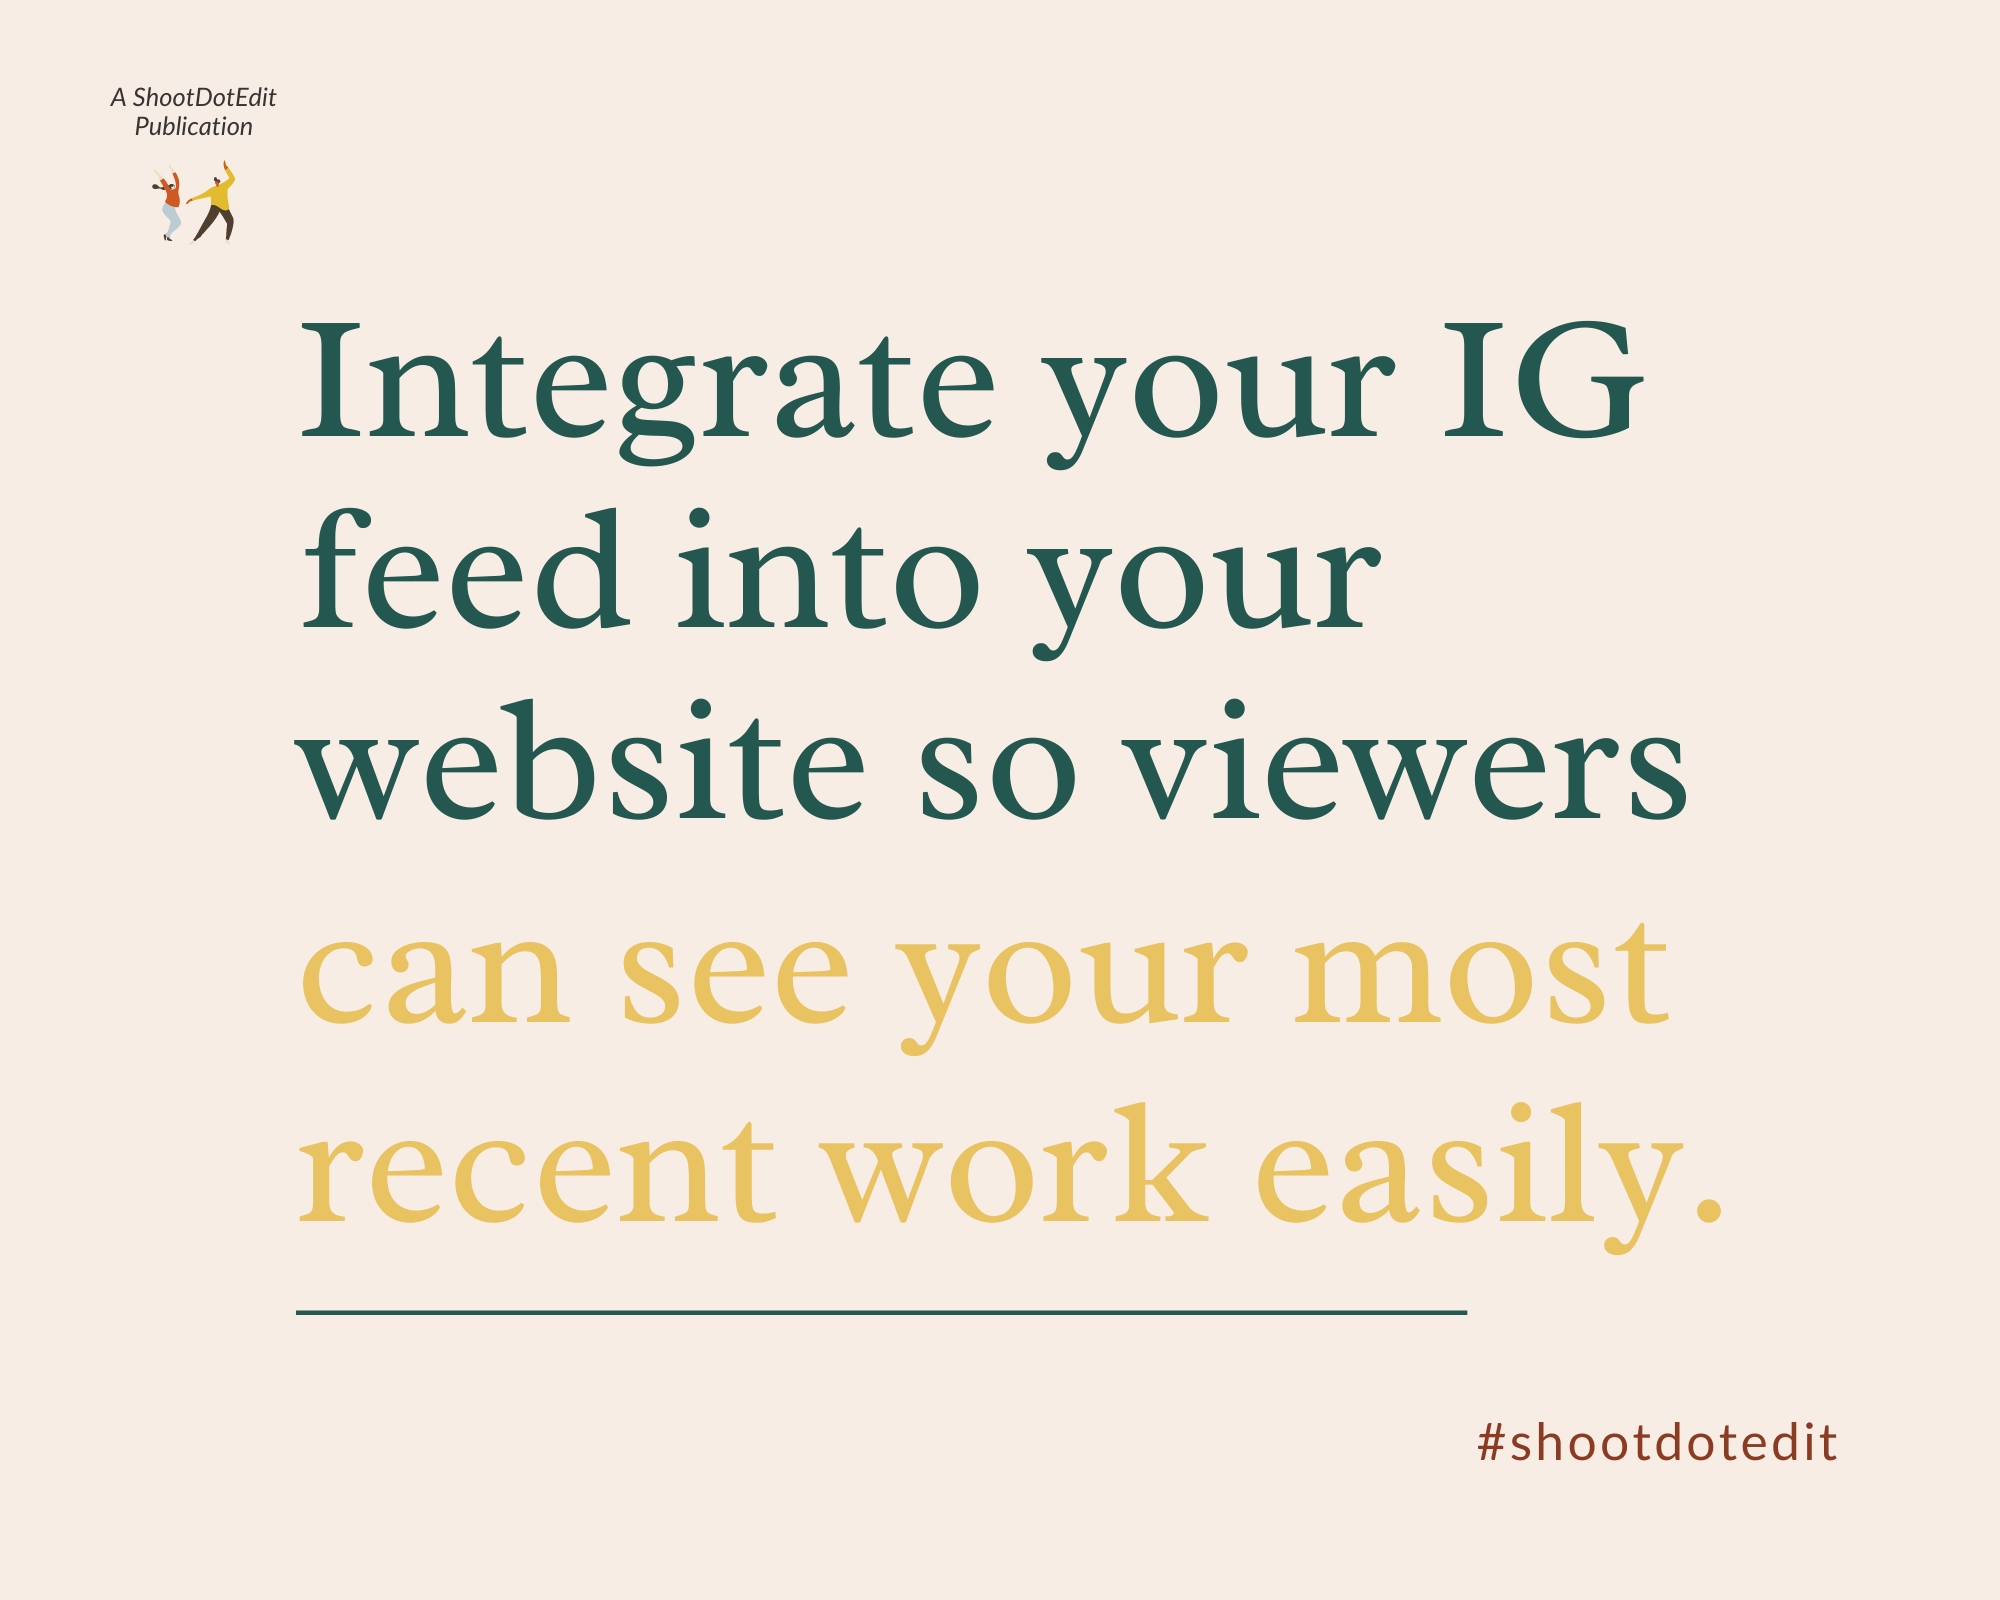 Infographic stating your IG feed into your website so viewers can see your most recent work easily